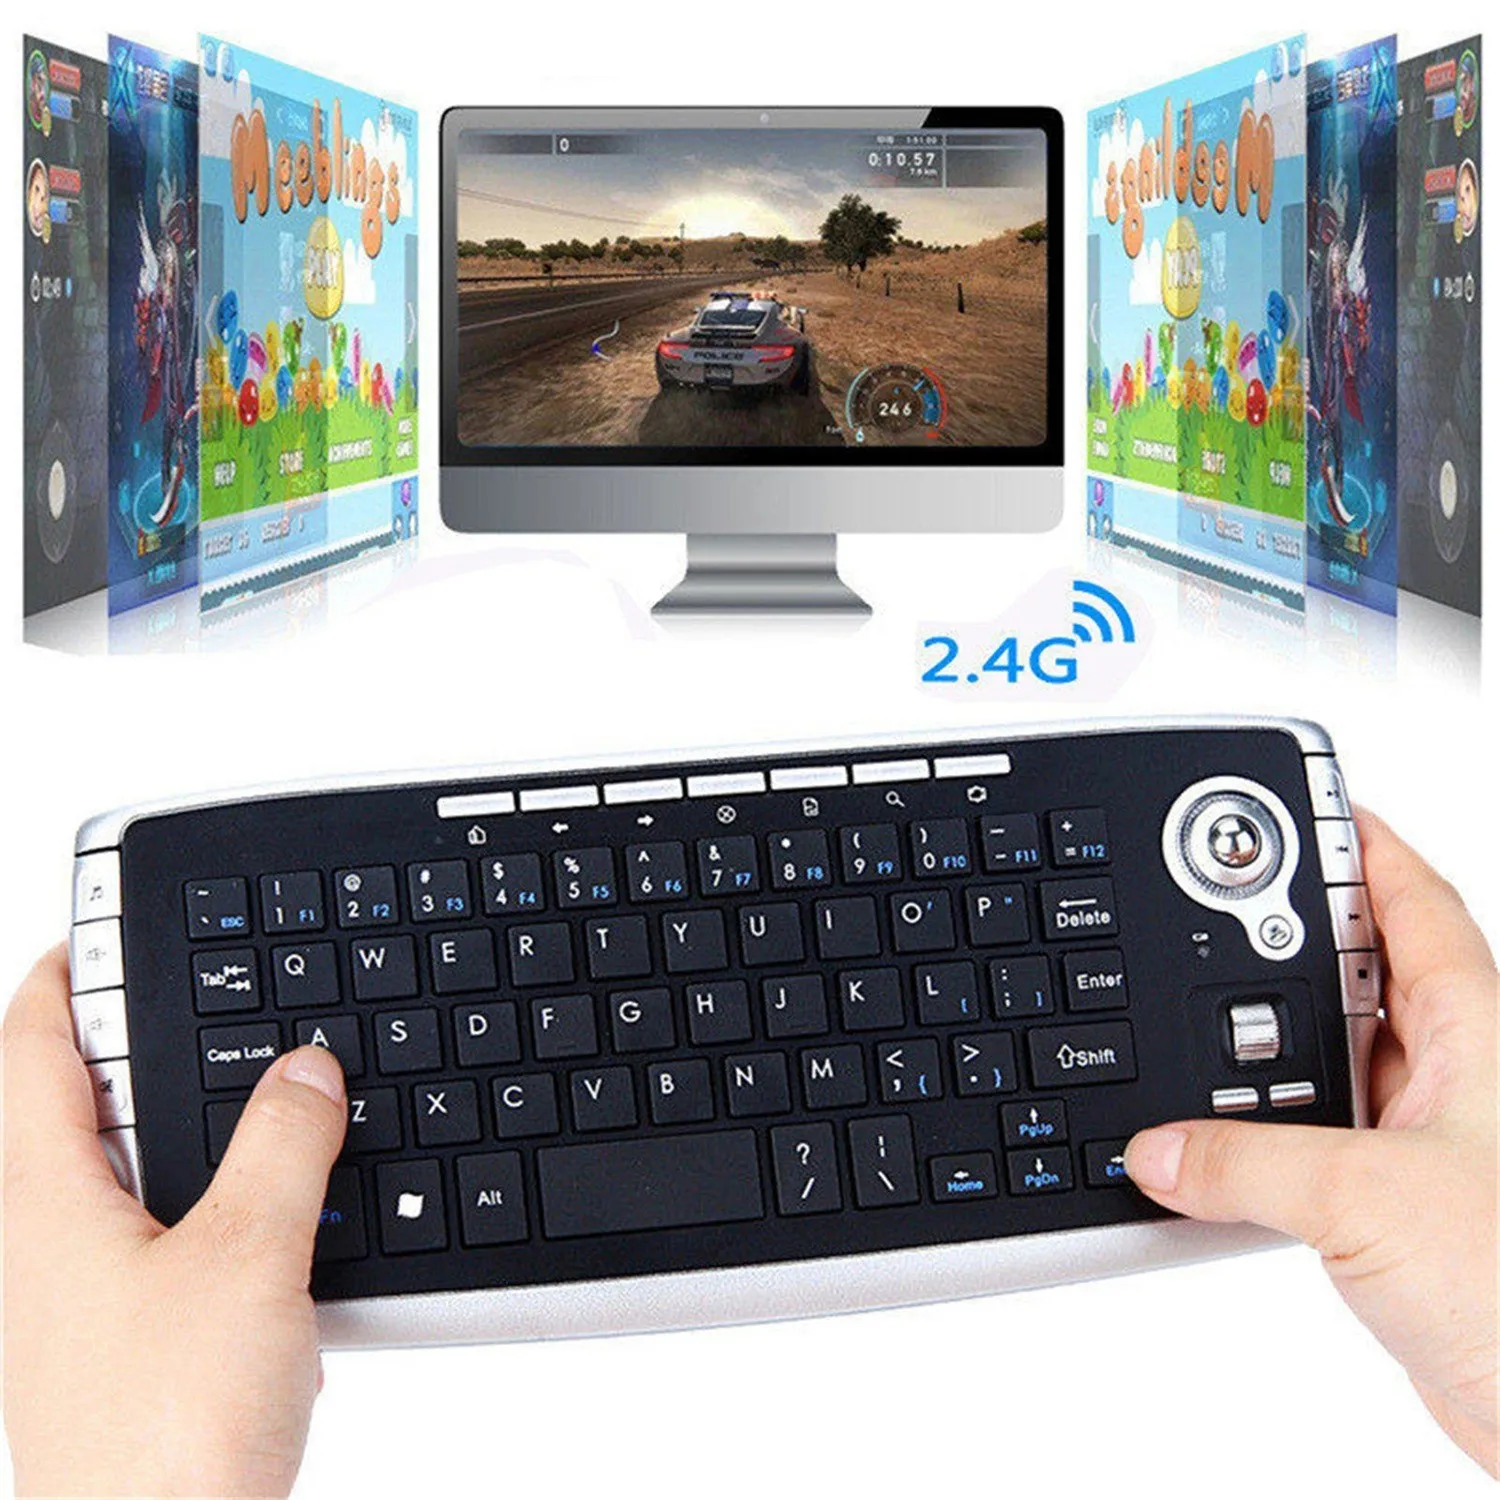 Wireless Keyboard with 2.4G USB Receiver + Trackball 2 In 1 Mouse Funtions Computer Keyboard 94 Keycaps Game Keypad For Laptop images - 6